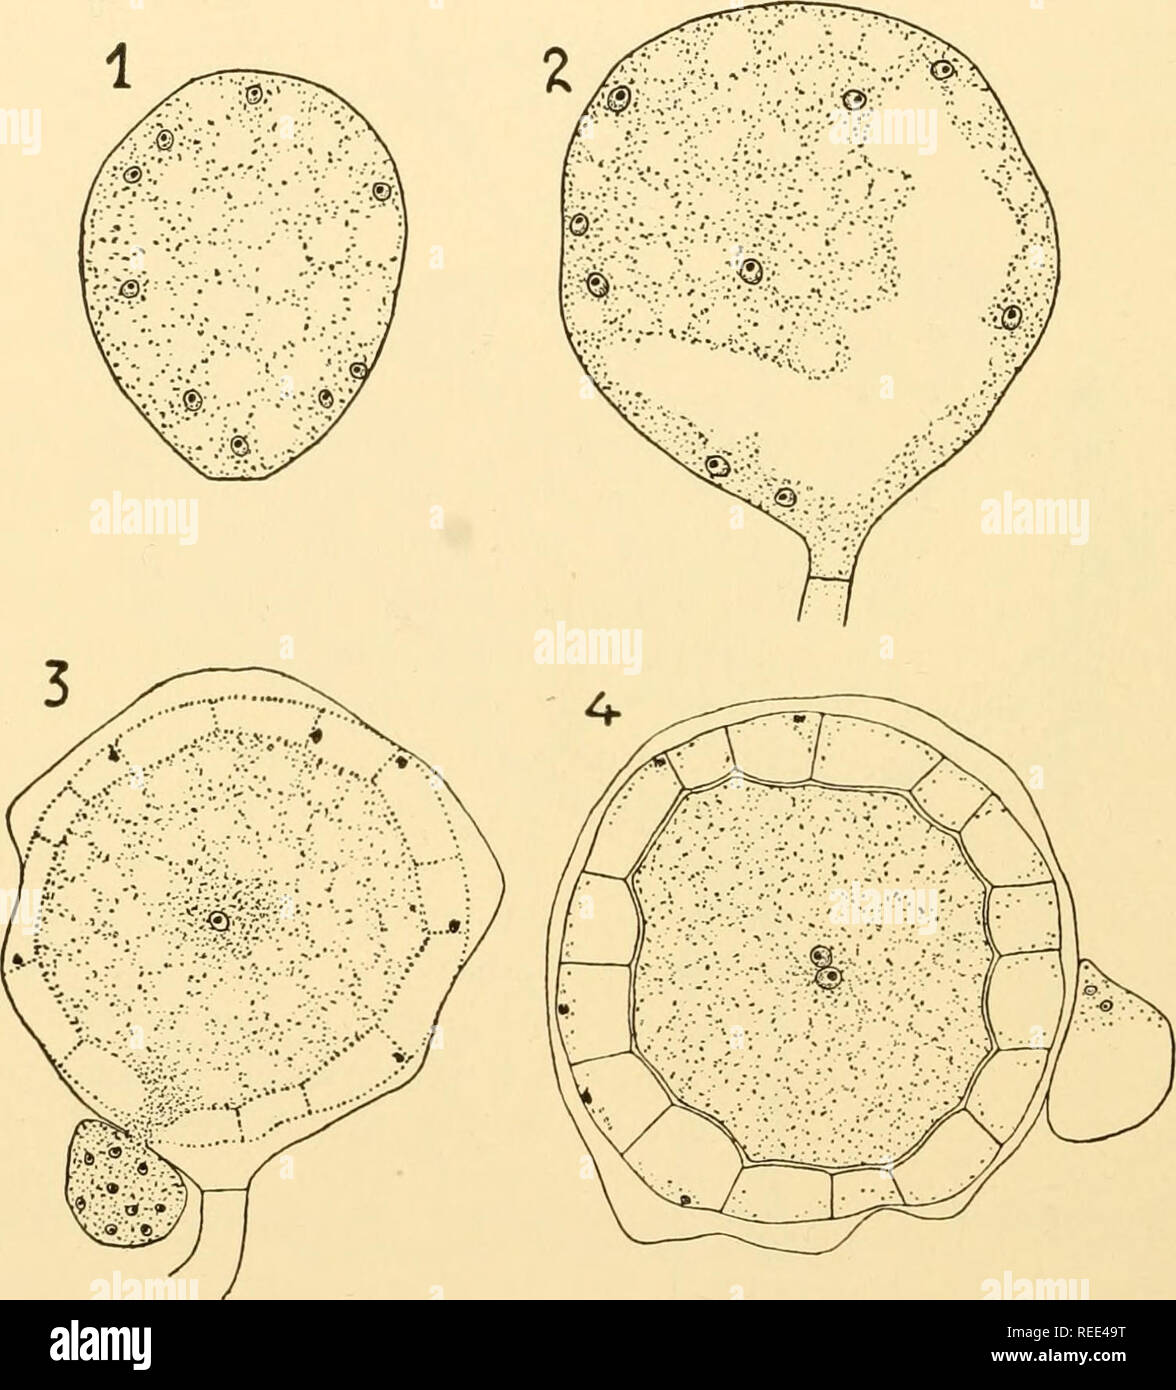 . Comparative morphology of Fungi. Fungi. 72 COMPARATIVE MORPHOLOGY OF FUNGI whose much-branched rhizoids are rooted in the substrate and bear on apical lobate processes, numerous thin, generally unbranched, hyphae which usually end with a sporangium (Fig. 41, 1). The zoospores arise, as in the Saprolegnieae, from peripheral protoplasm, shortly before evacuation the inner layer of the sporangial walls swells. The outer cuticular membrane is separated as a small lid at the top of the sporan-. Fig. 43.—Araiospora -pulchra. Development of oogonia. 1. Young oogonium with peripheral nuclei. 2. Fund Stock Photo